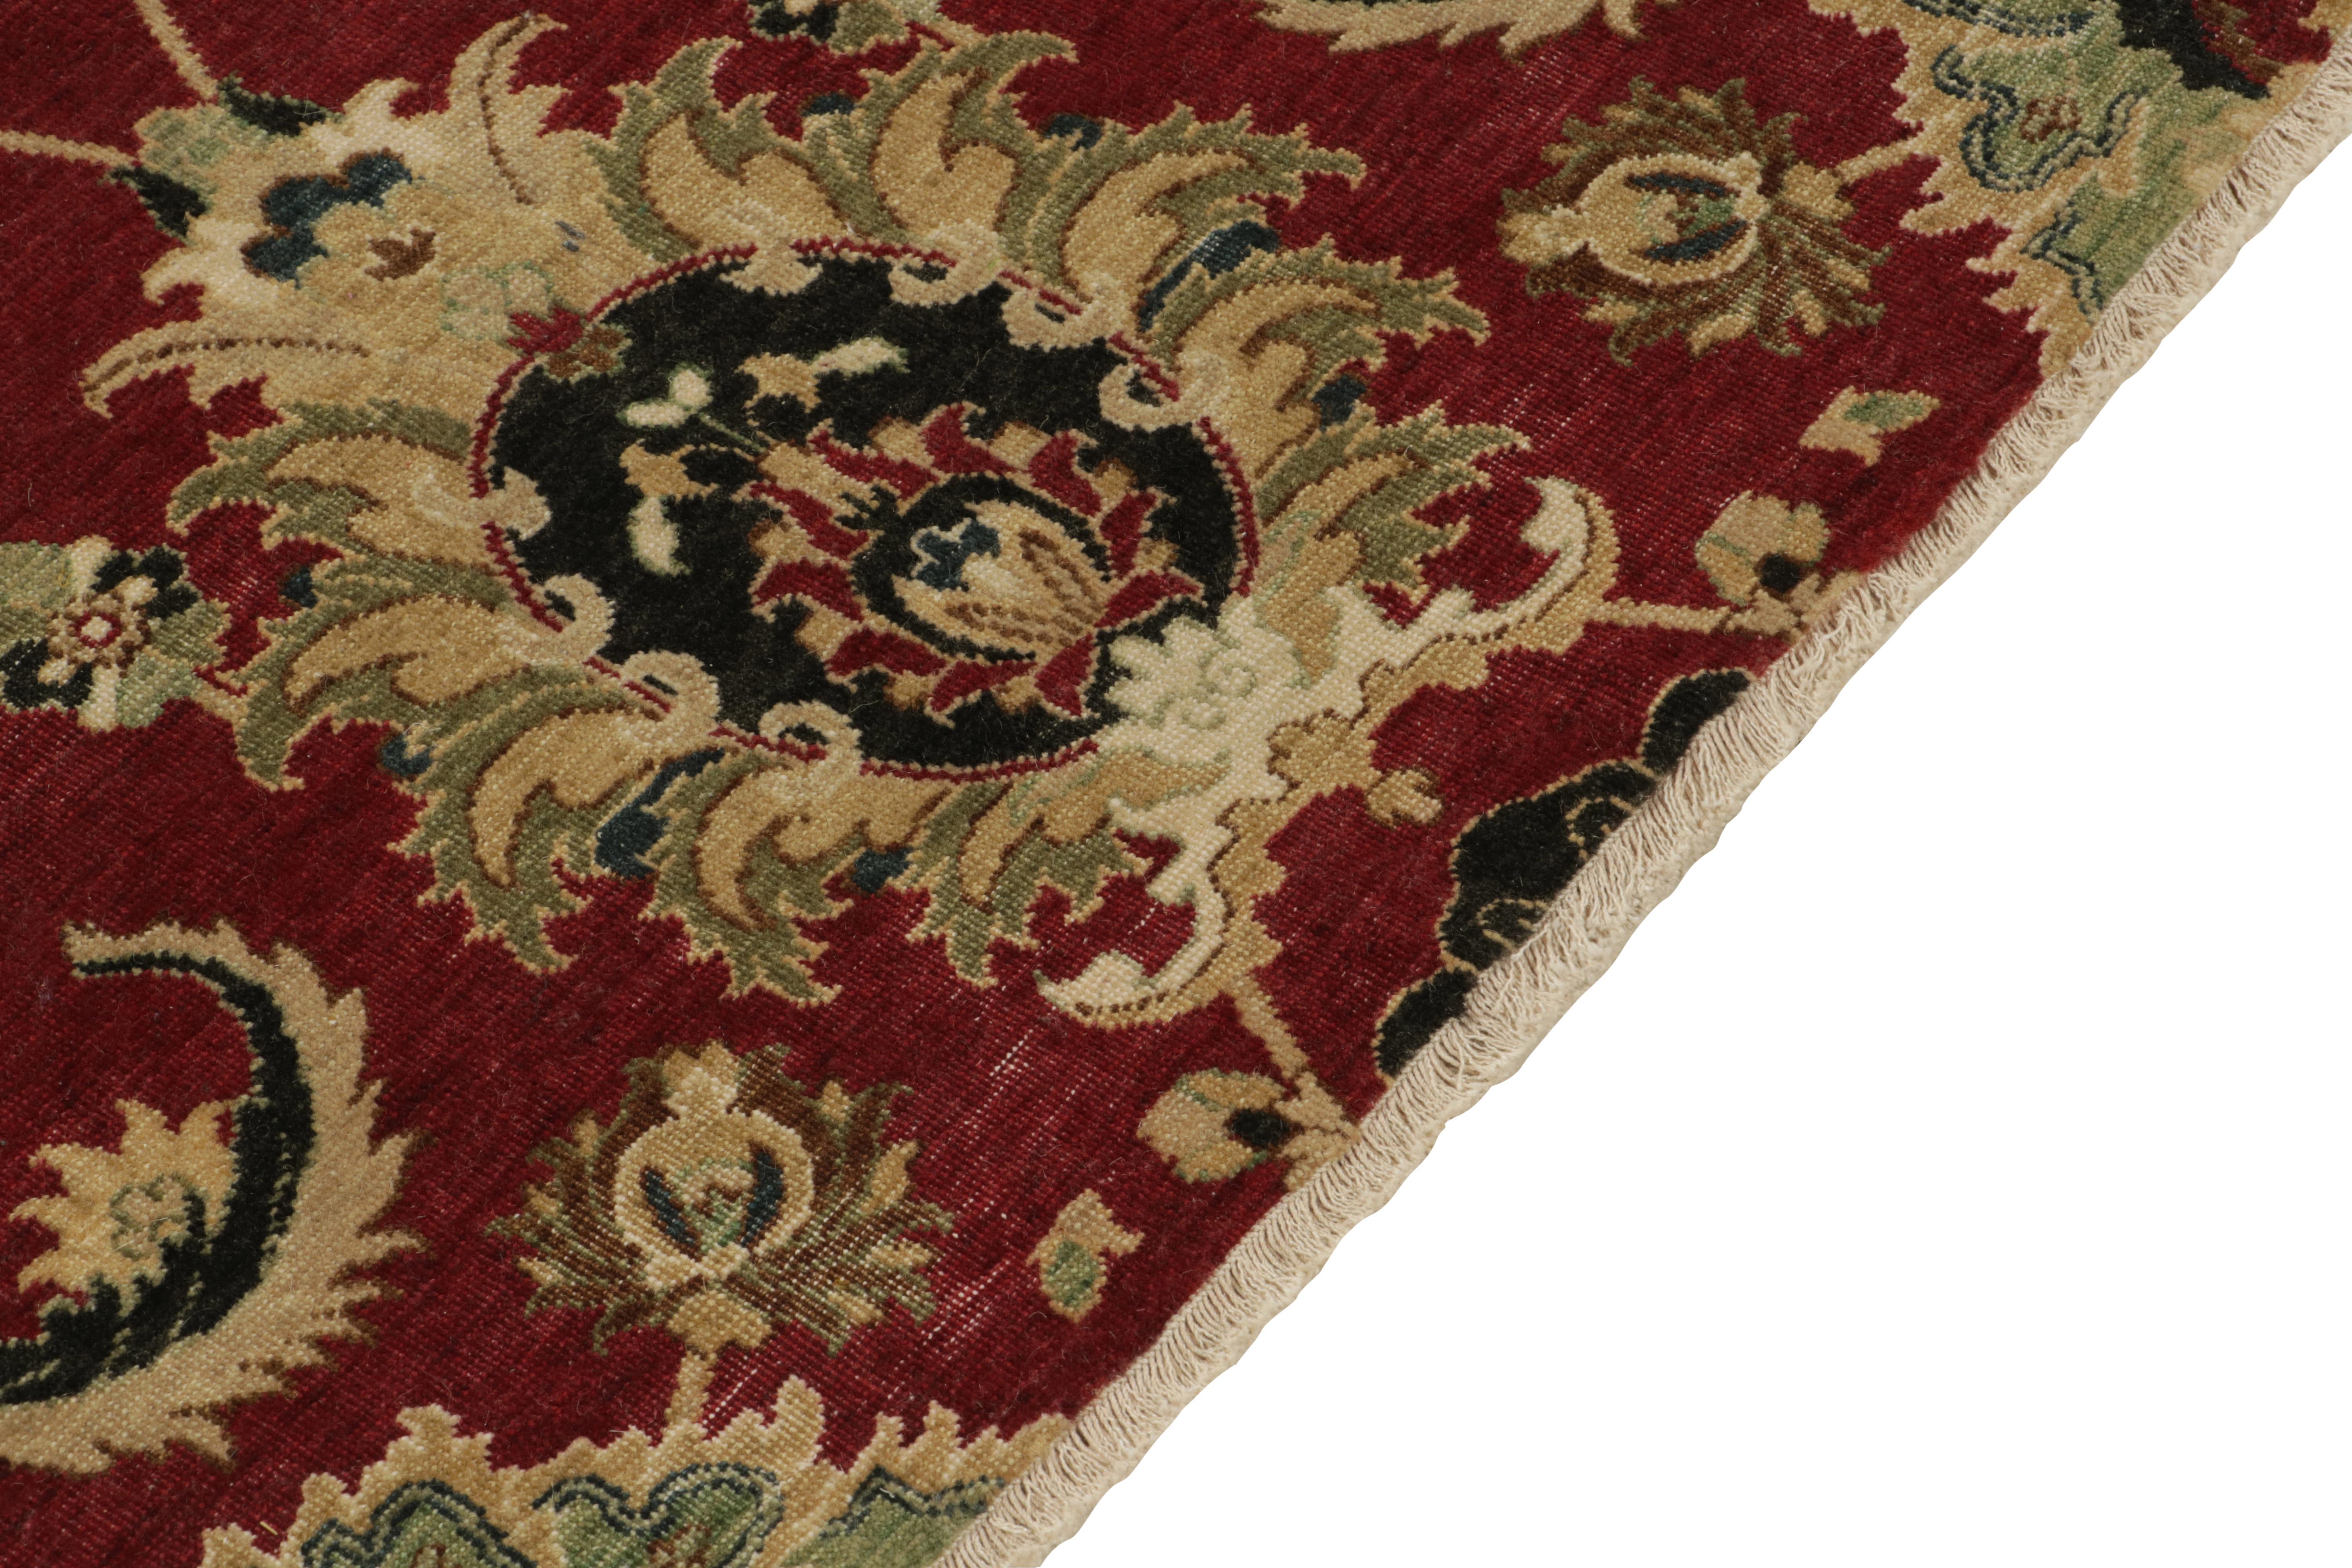 Rug & Kilim's 17th-Century Inspired Rug in Burgundy, Gold & Green Florals In New Condition For Sale In Long Island City, NY